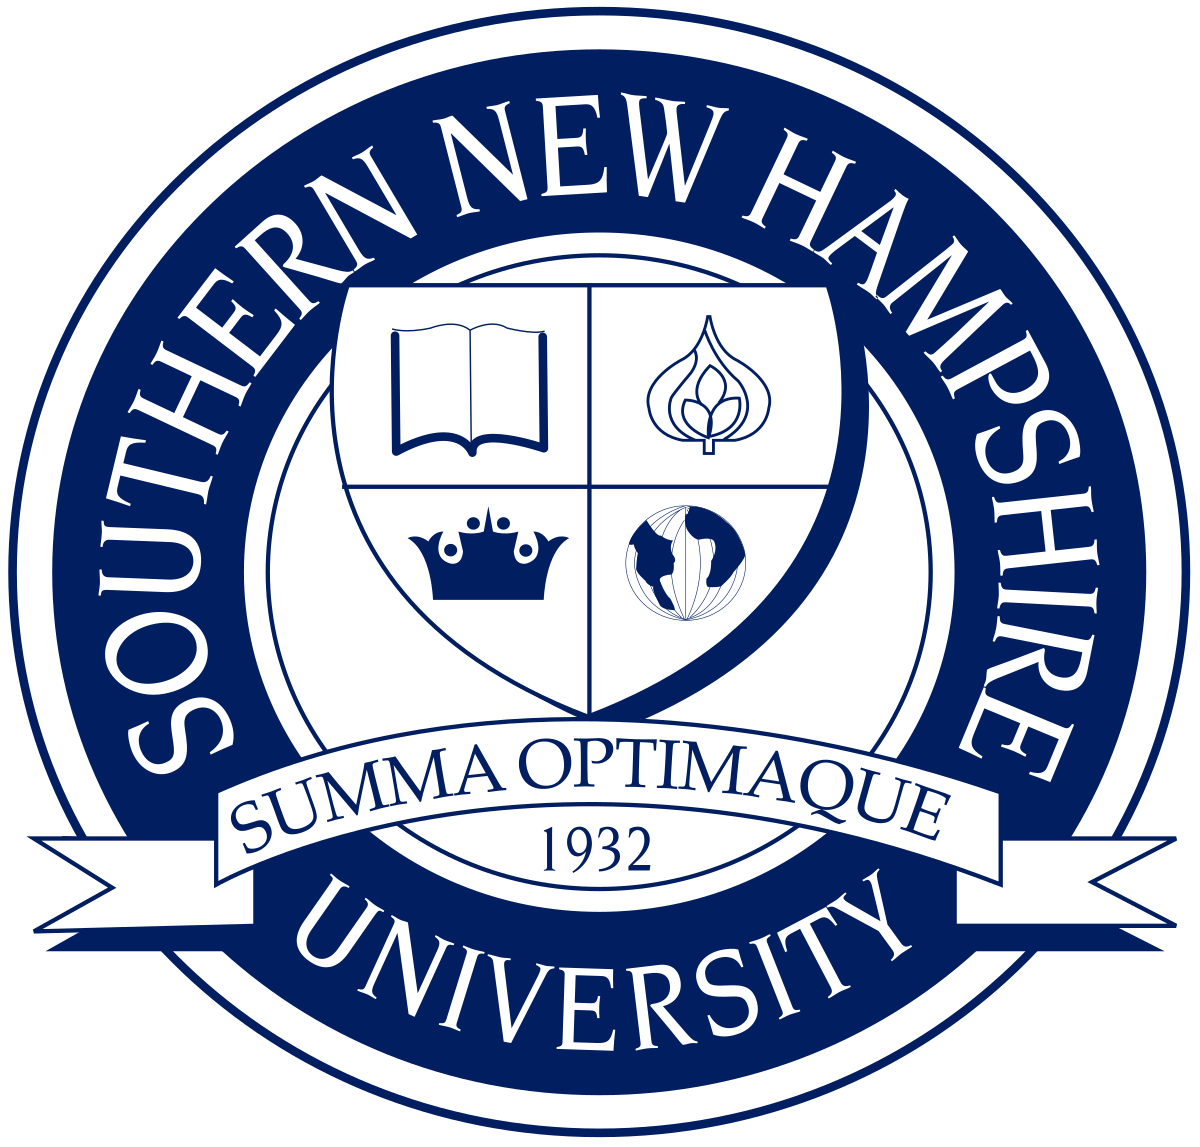 Southern New Hampshire University Acceptance rate